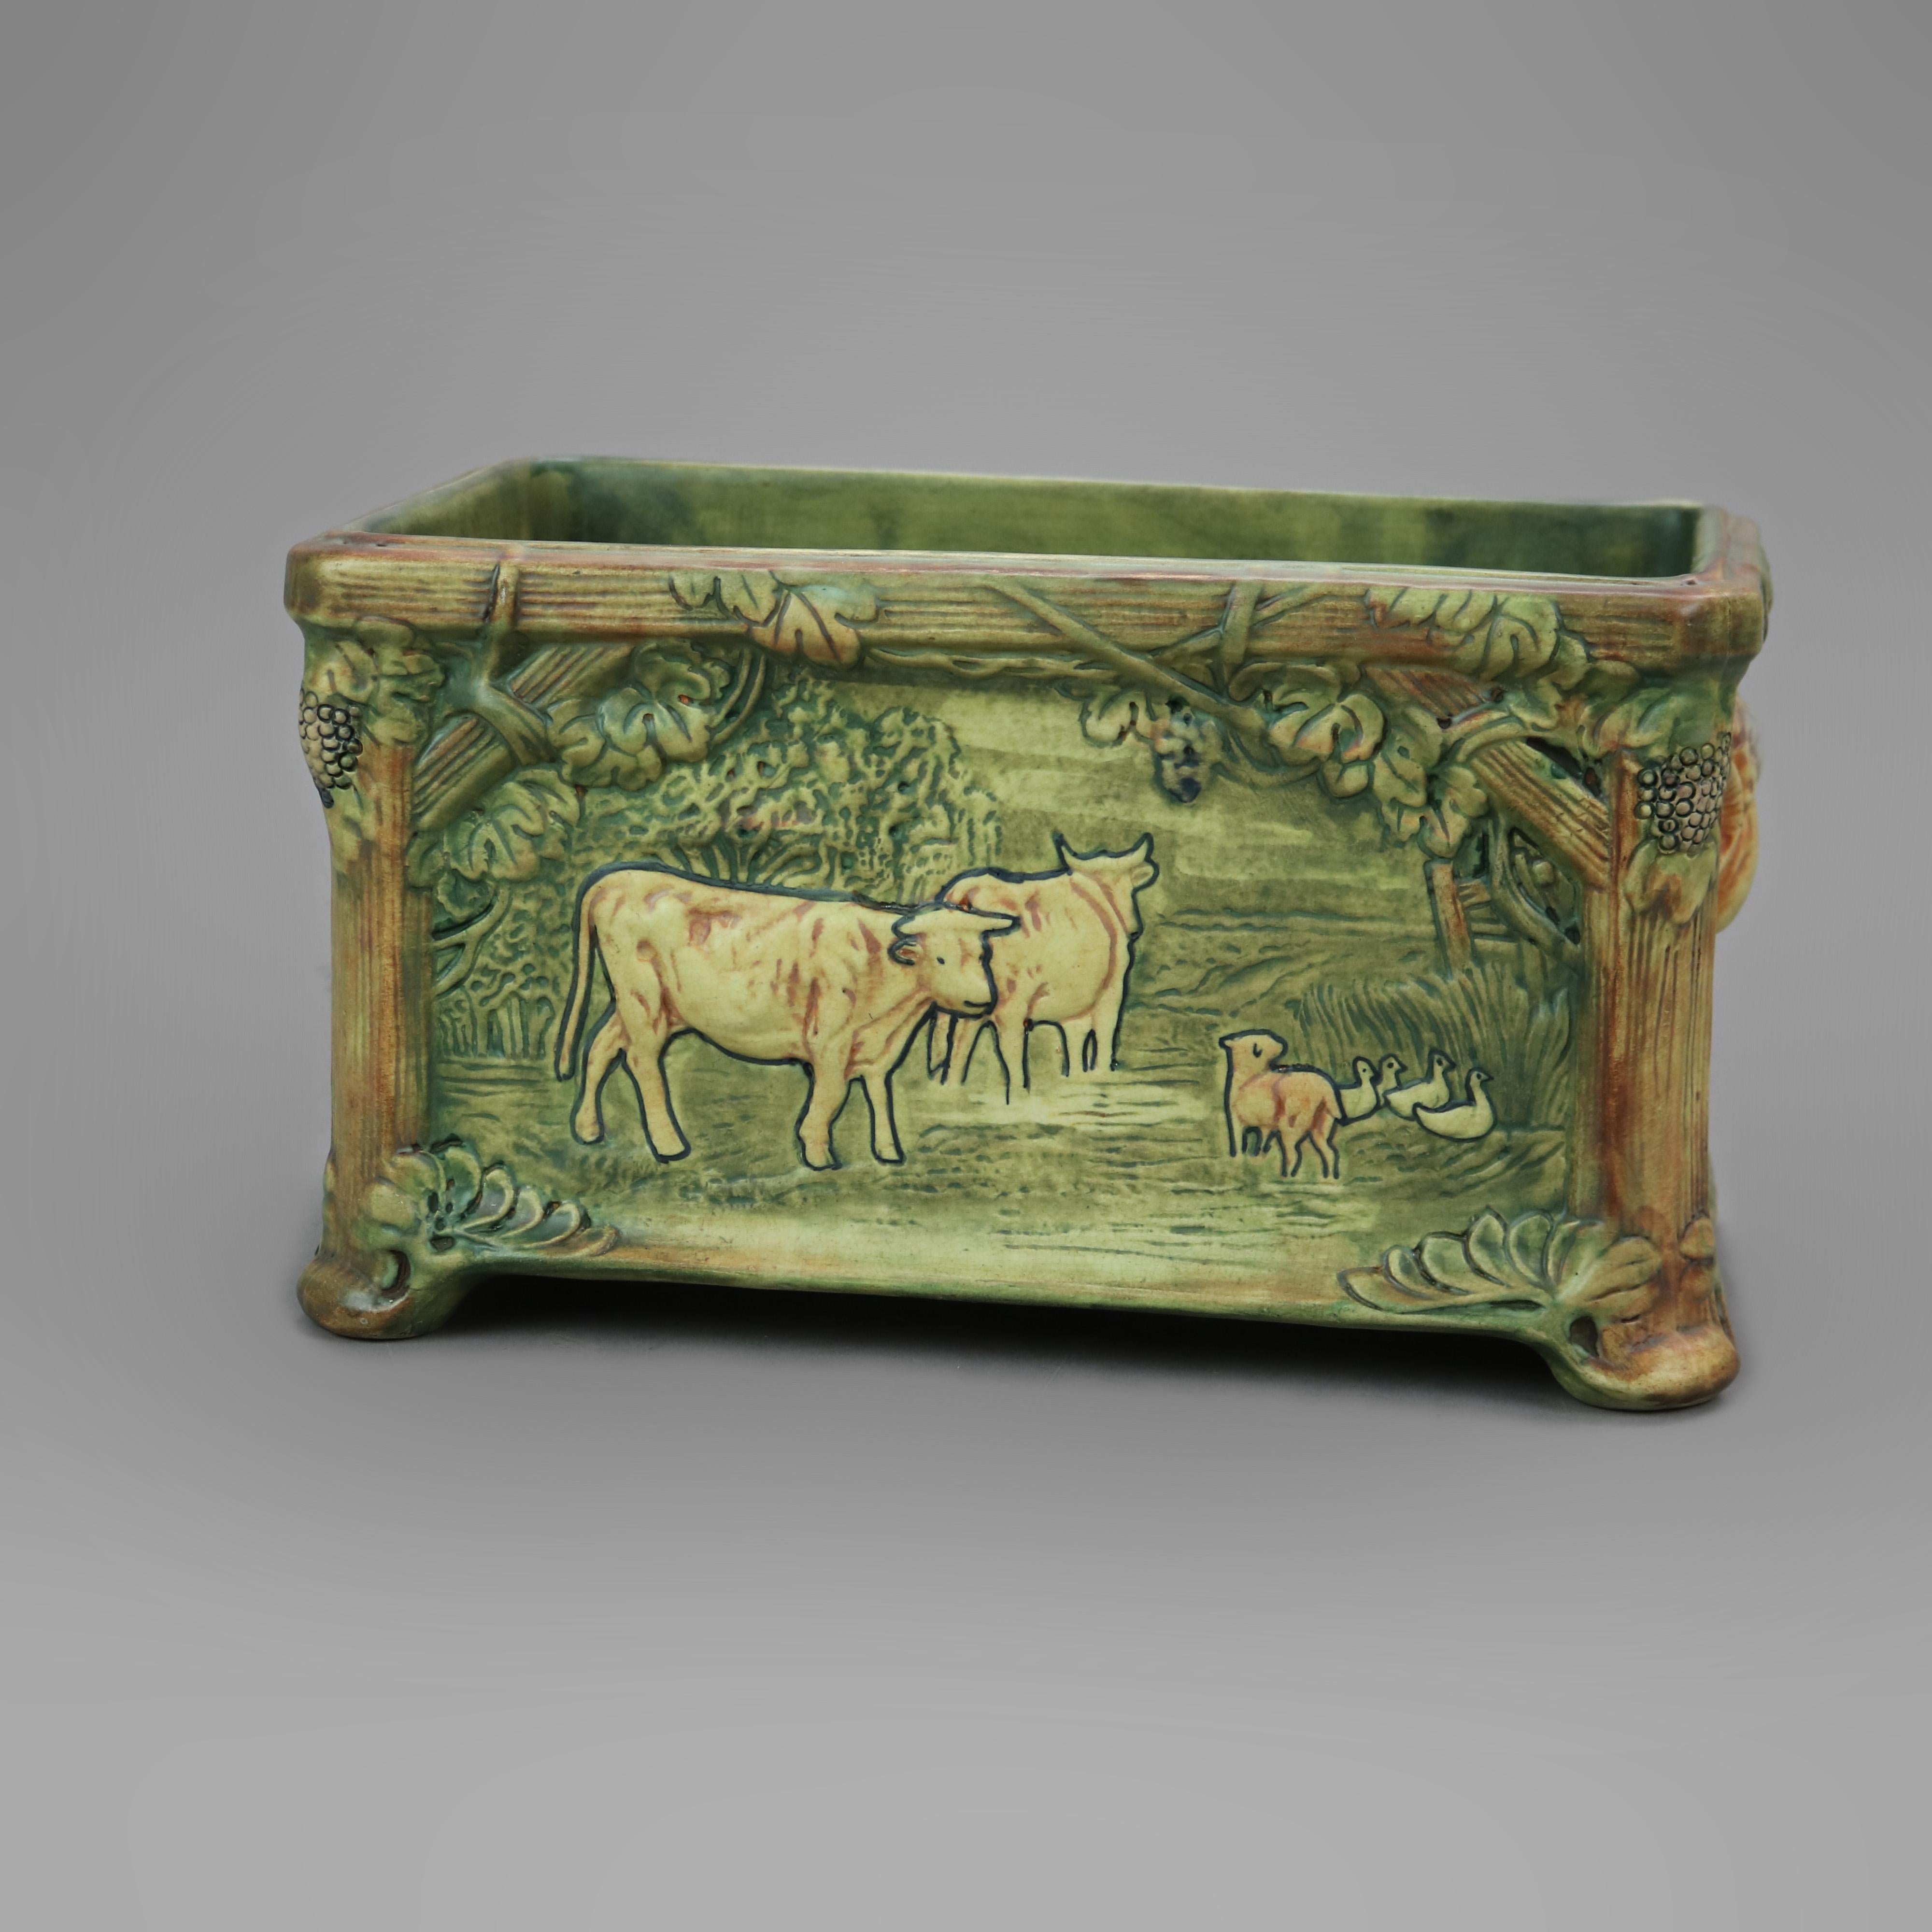 Rare antique window box jardiniere by Weller offers art pottery construction with cow in relief in countryside setting, signed on base as photographed, c1930

Measures - 7'' H x 12.25'' W x 7.25'' D.